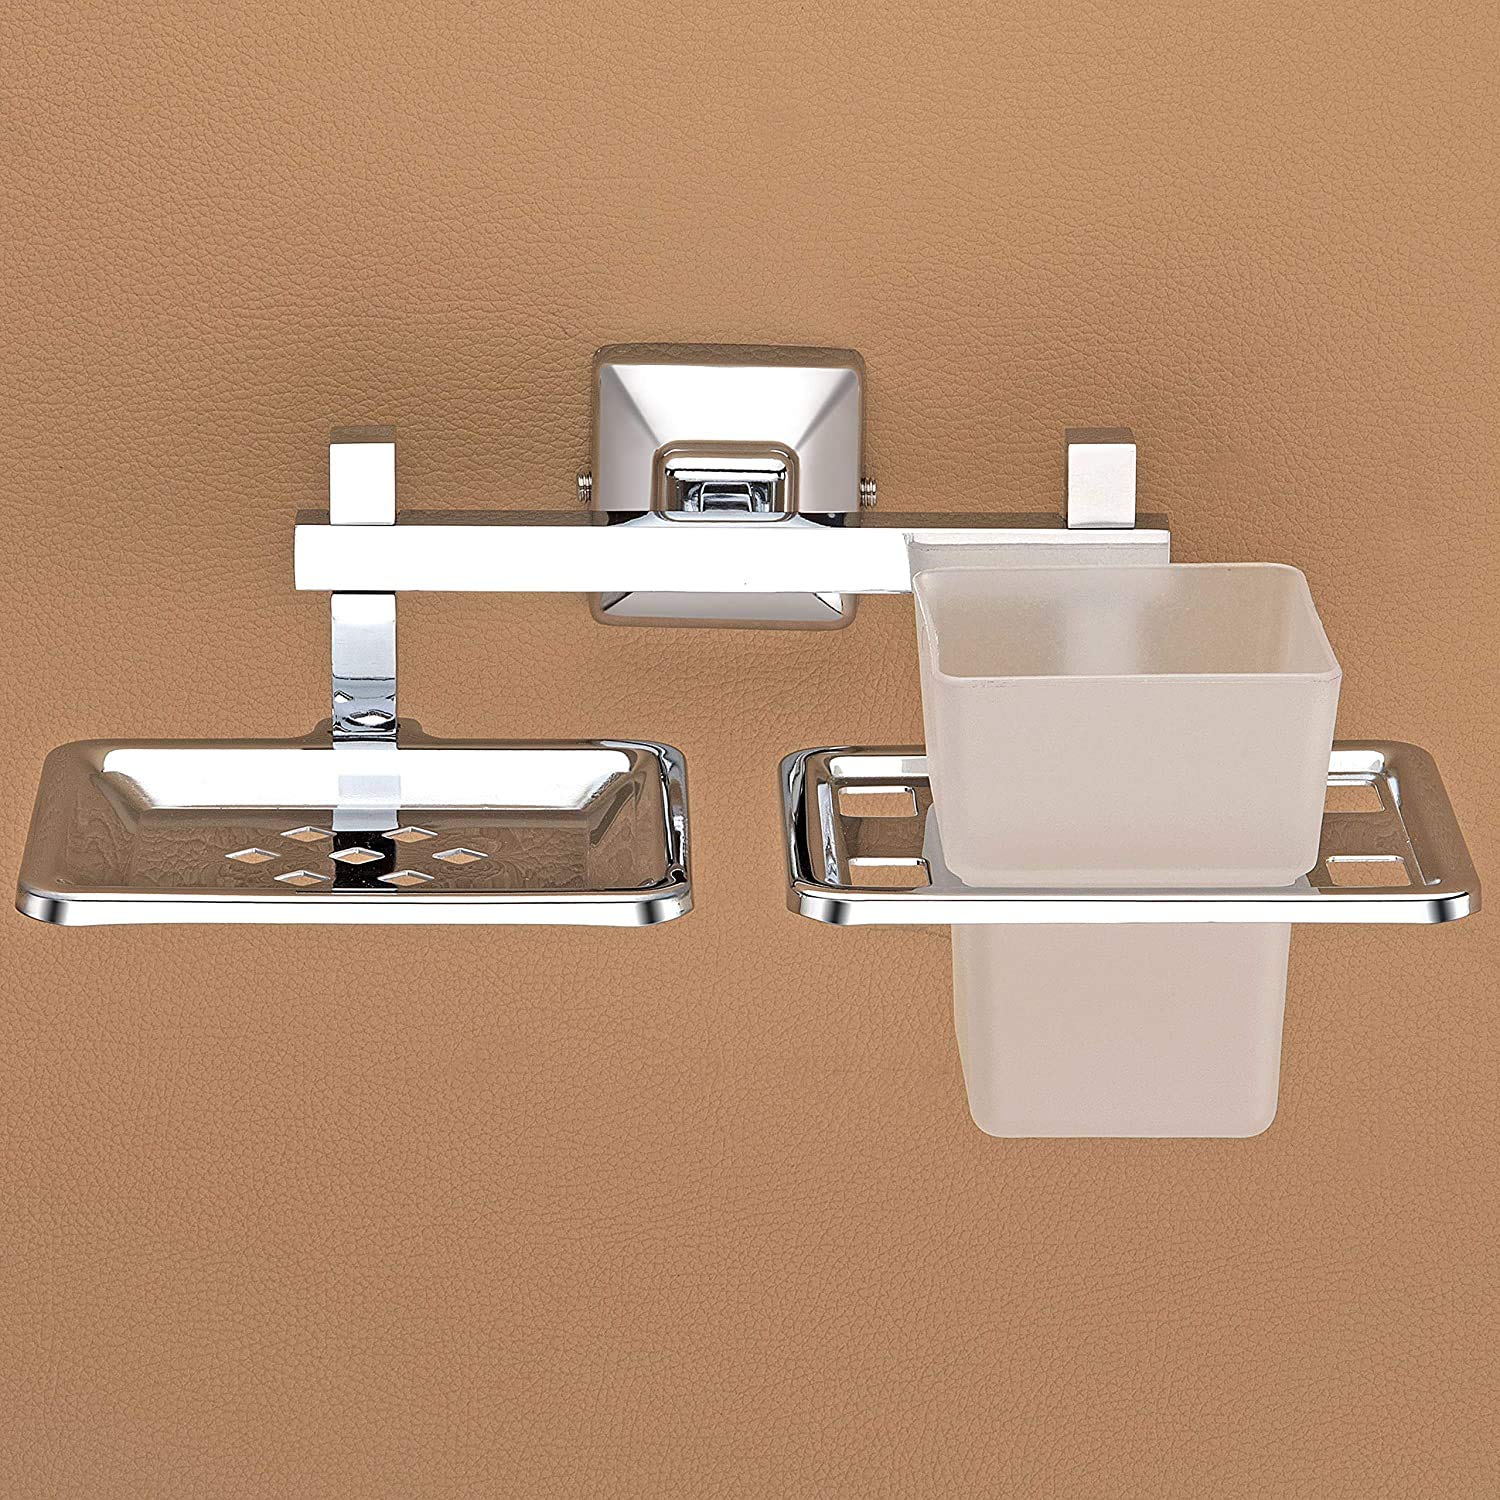 Plantex Stainless Steel 304 Grade Squaro 2in1 Soap Holder with Tumbler Holder/Bathroom Accessories(Chrome) - Pack of 2